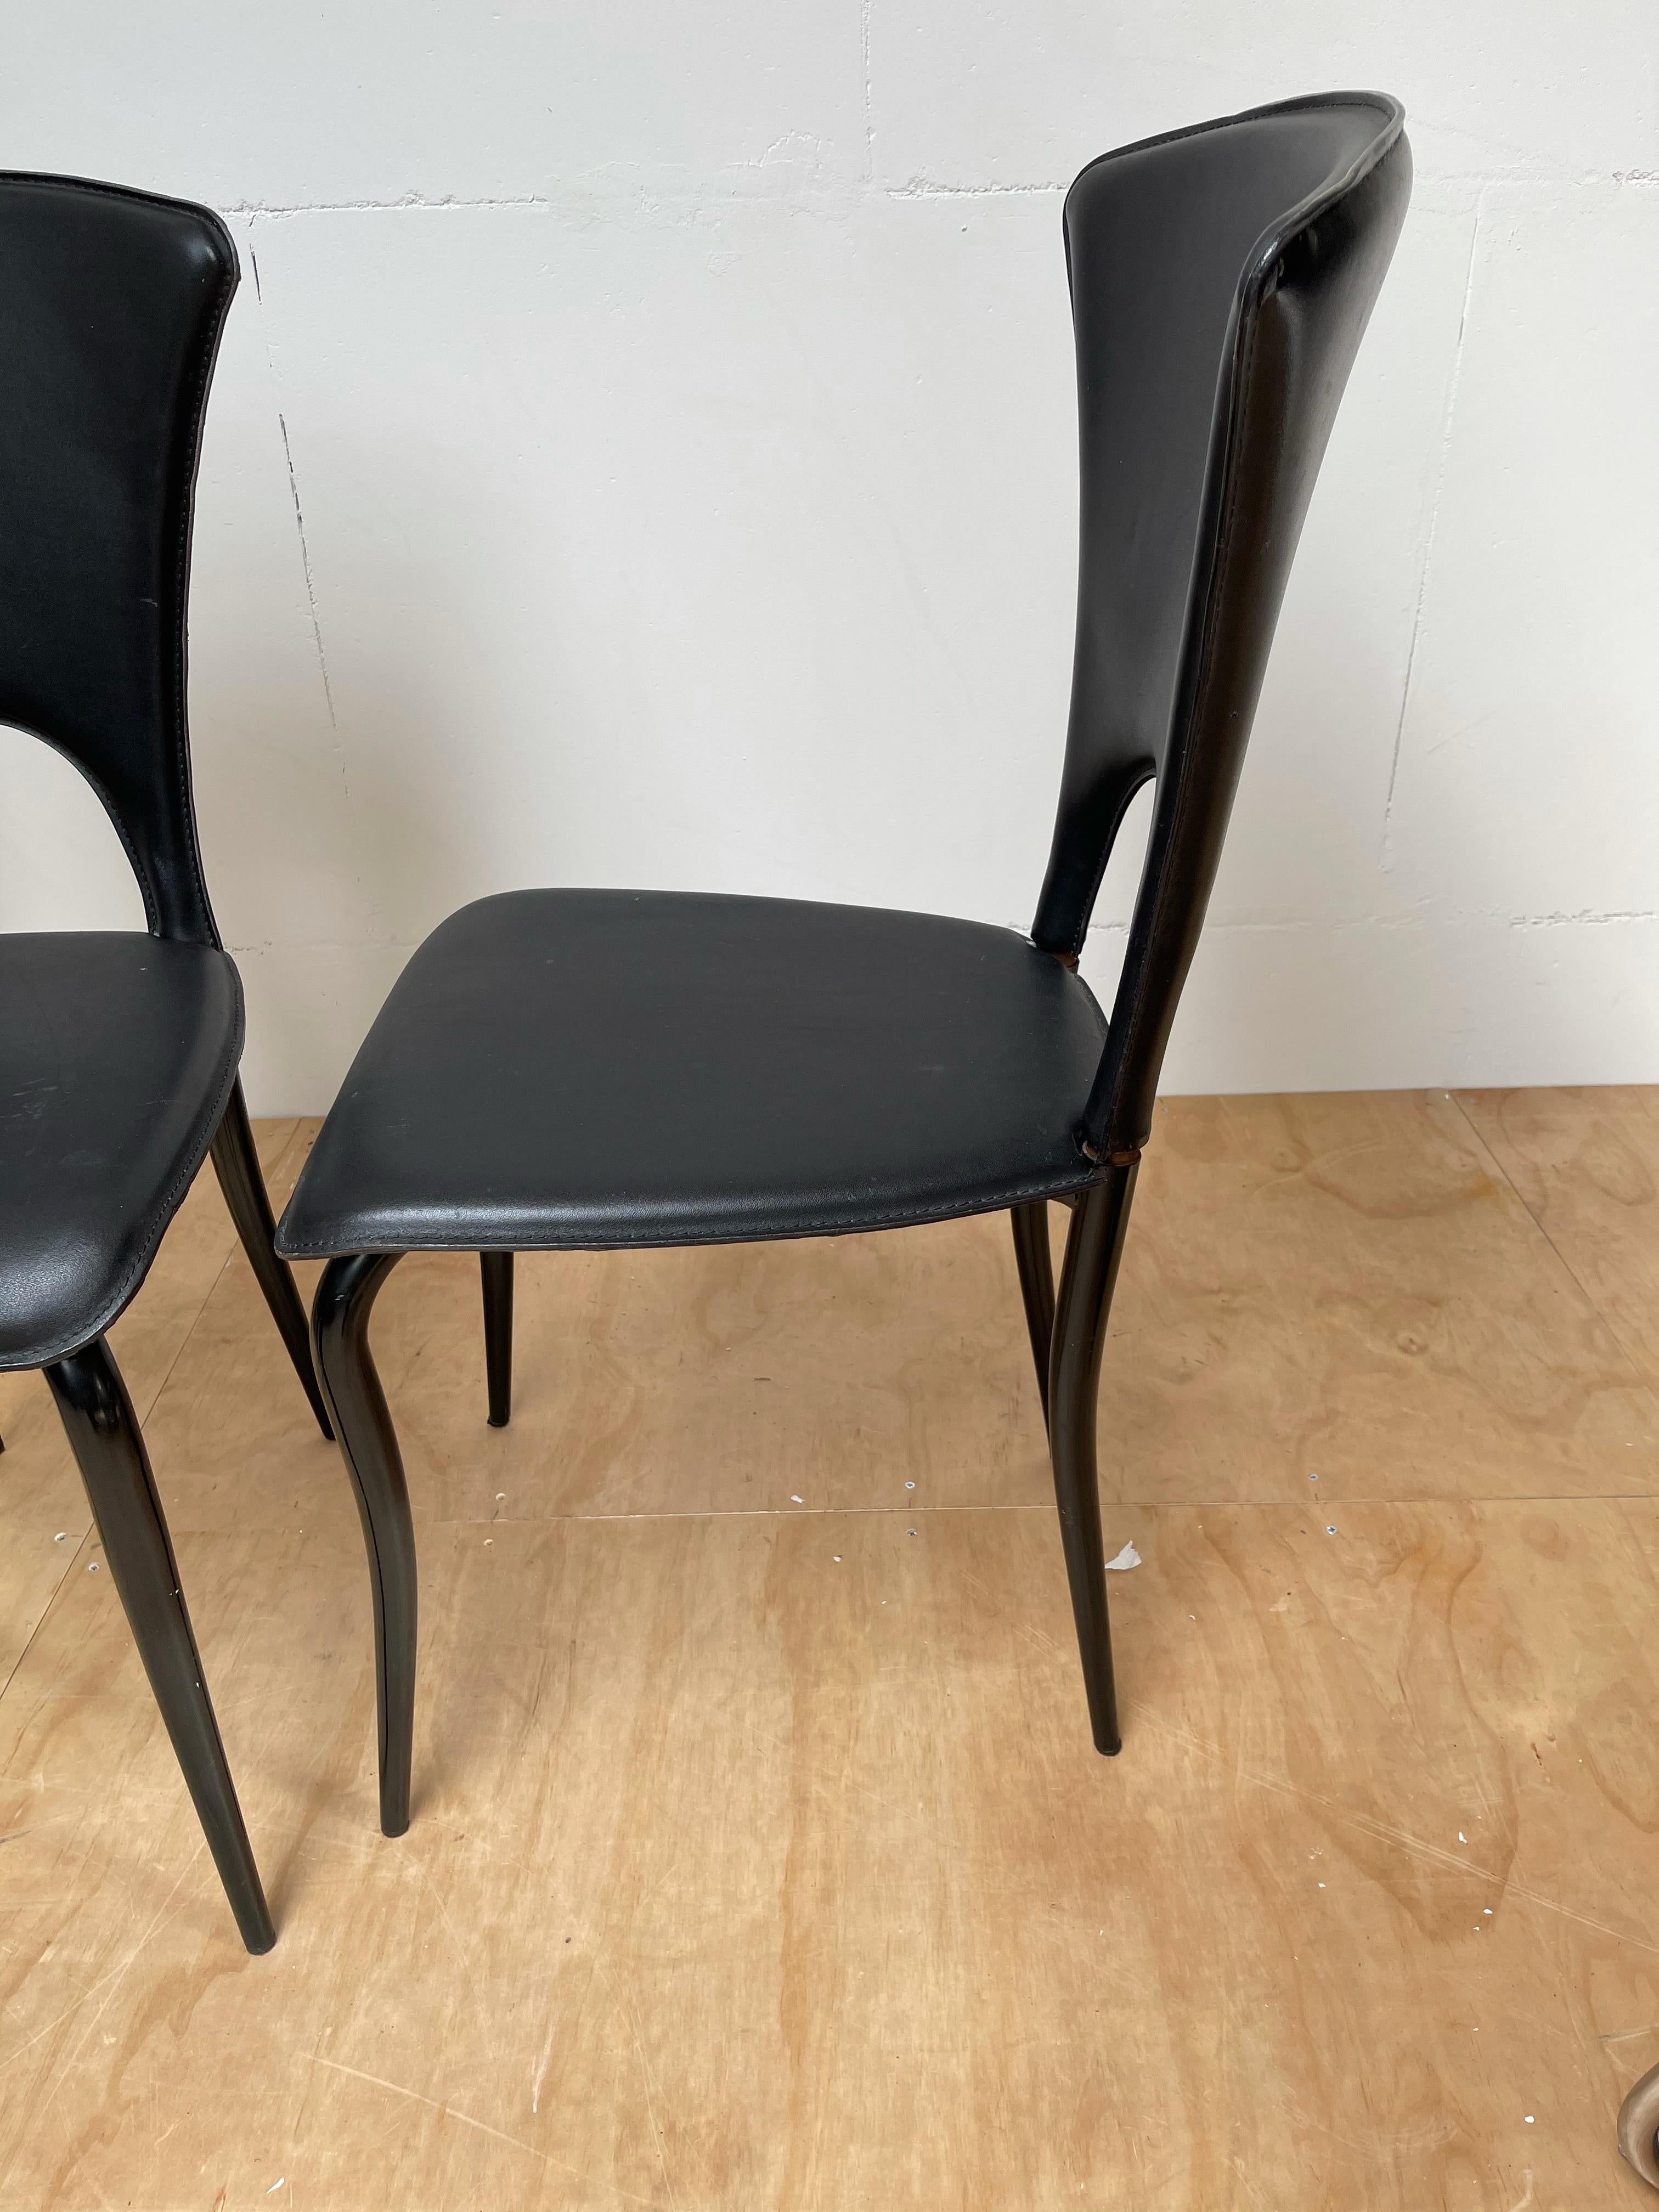 Italian Design Mid-Century Modern Set of 4 Dining Chairs w. Black Leather Seats For Sale 9